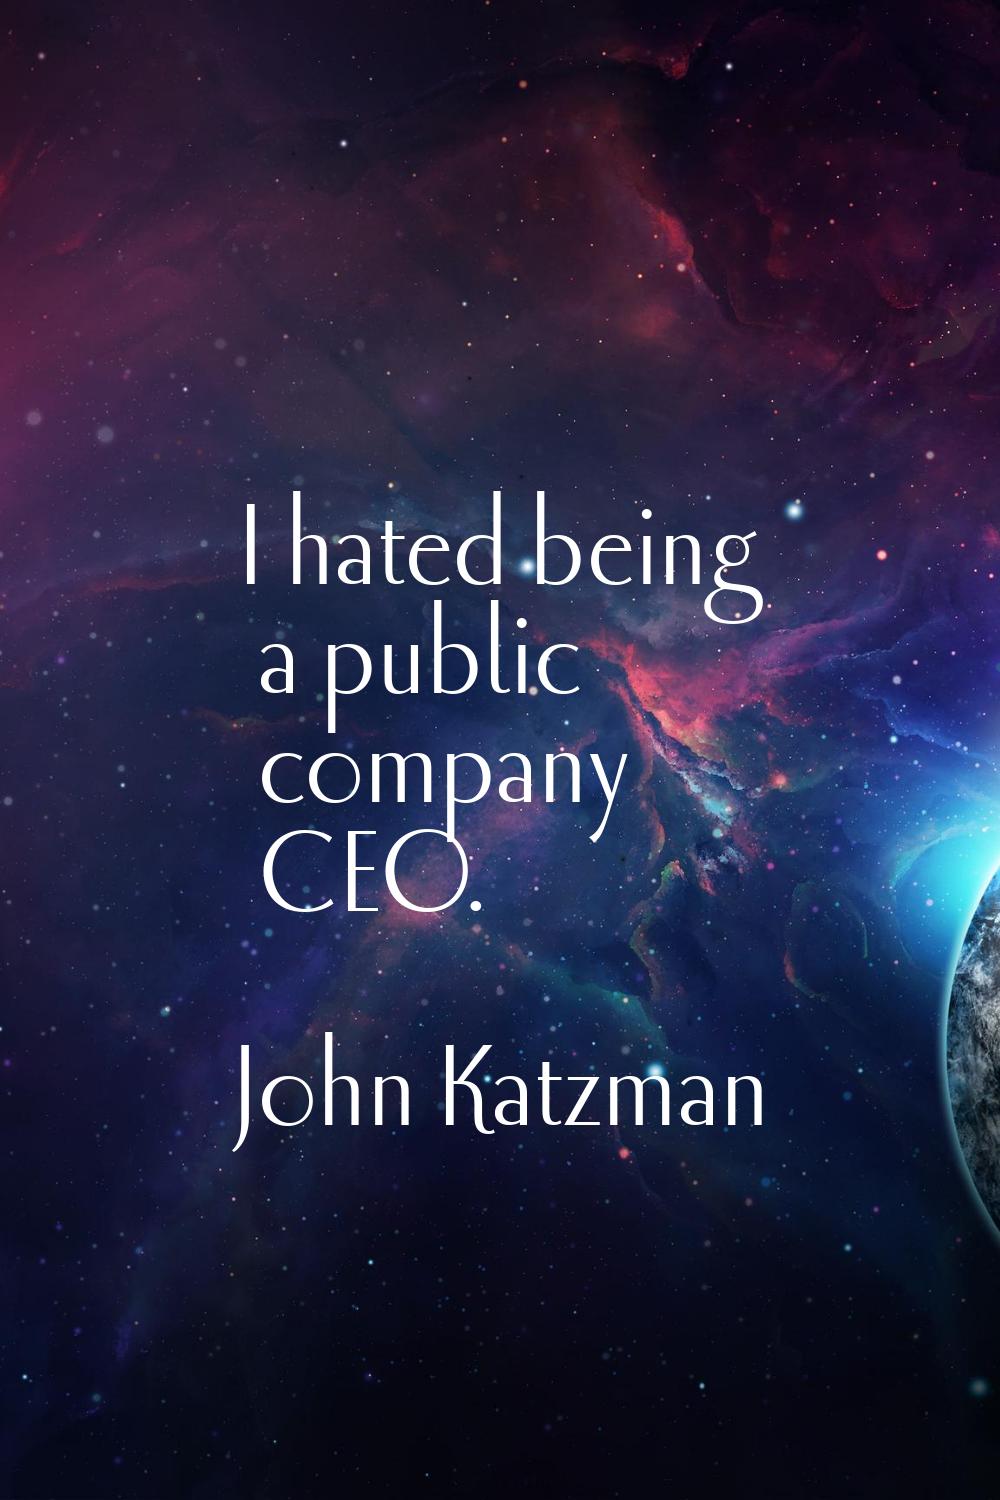 I hated being a public company CEO.